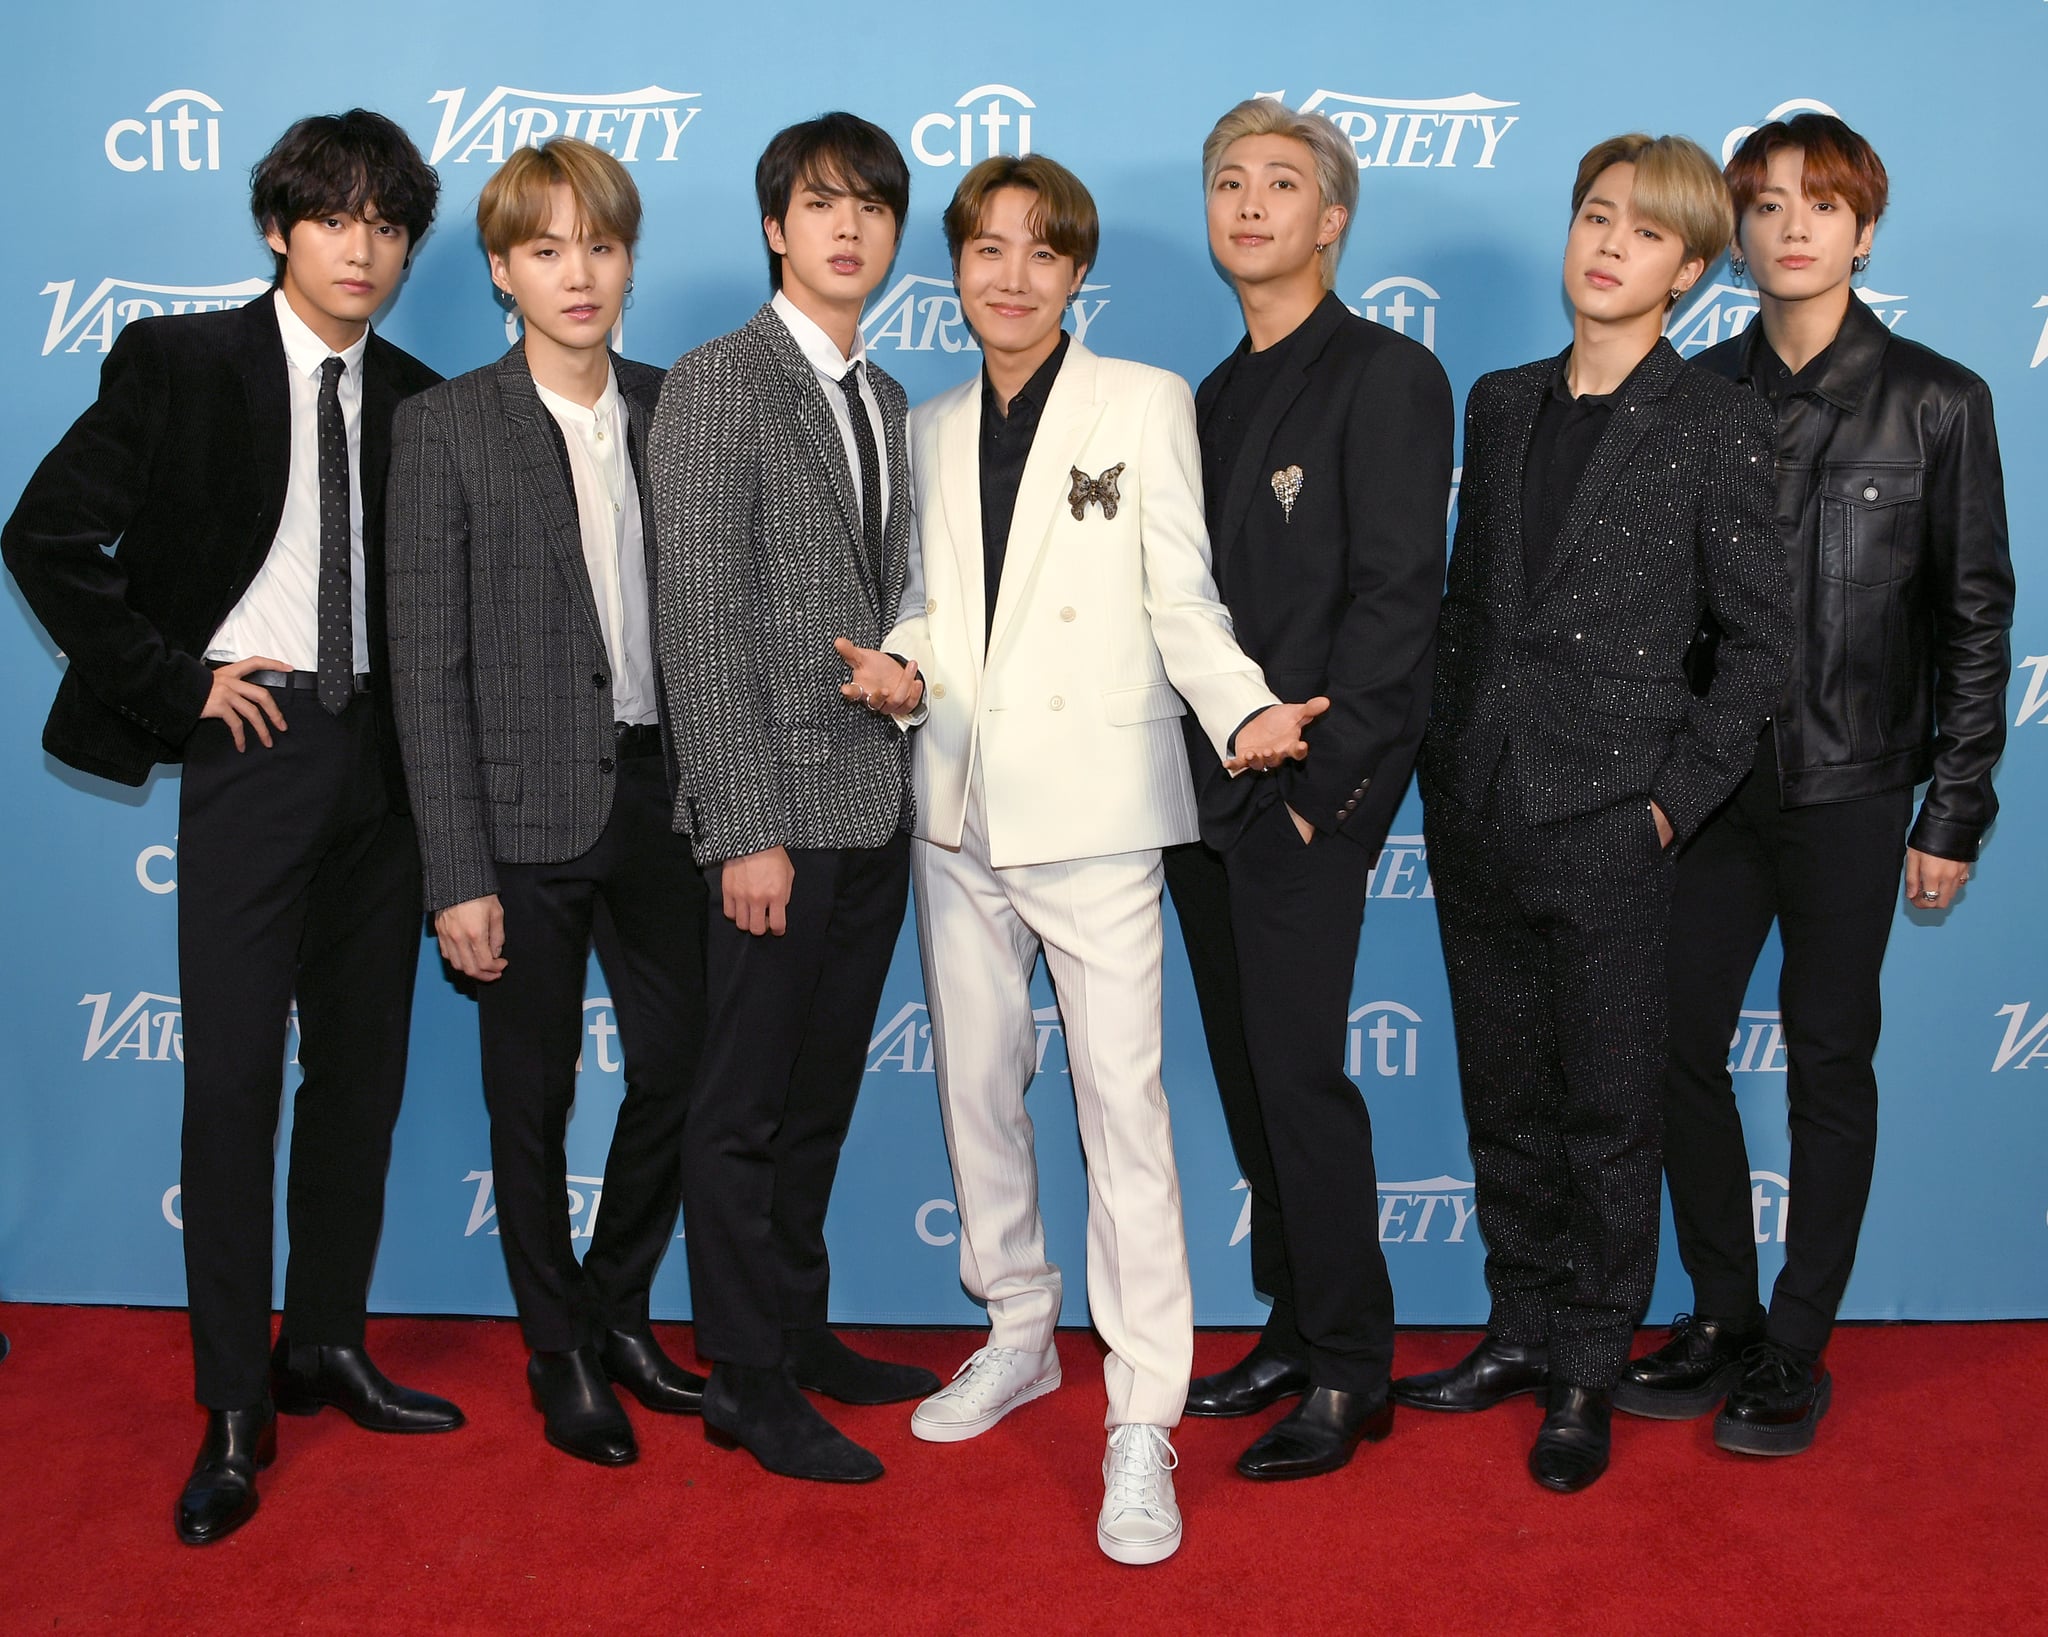 WEST HOLLYWOOD, CALIFORNIA - DECEMBER 07: (L-R) V, SUGA, Jin, J-Hope, RM, Jimin, and Jungkook of BTS attend the 2019 Variety's Hitmakers Brunch at Soho House on December 07, 2019 in West Hollywood, California. (Photo by Jon Kopaloff/Getty Images)